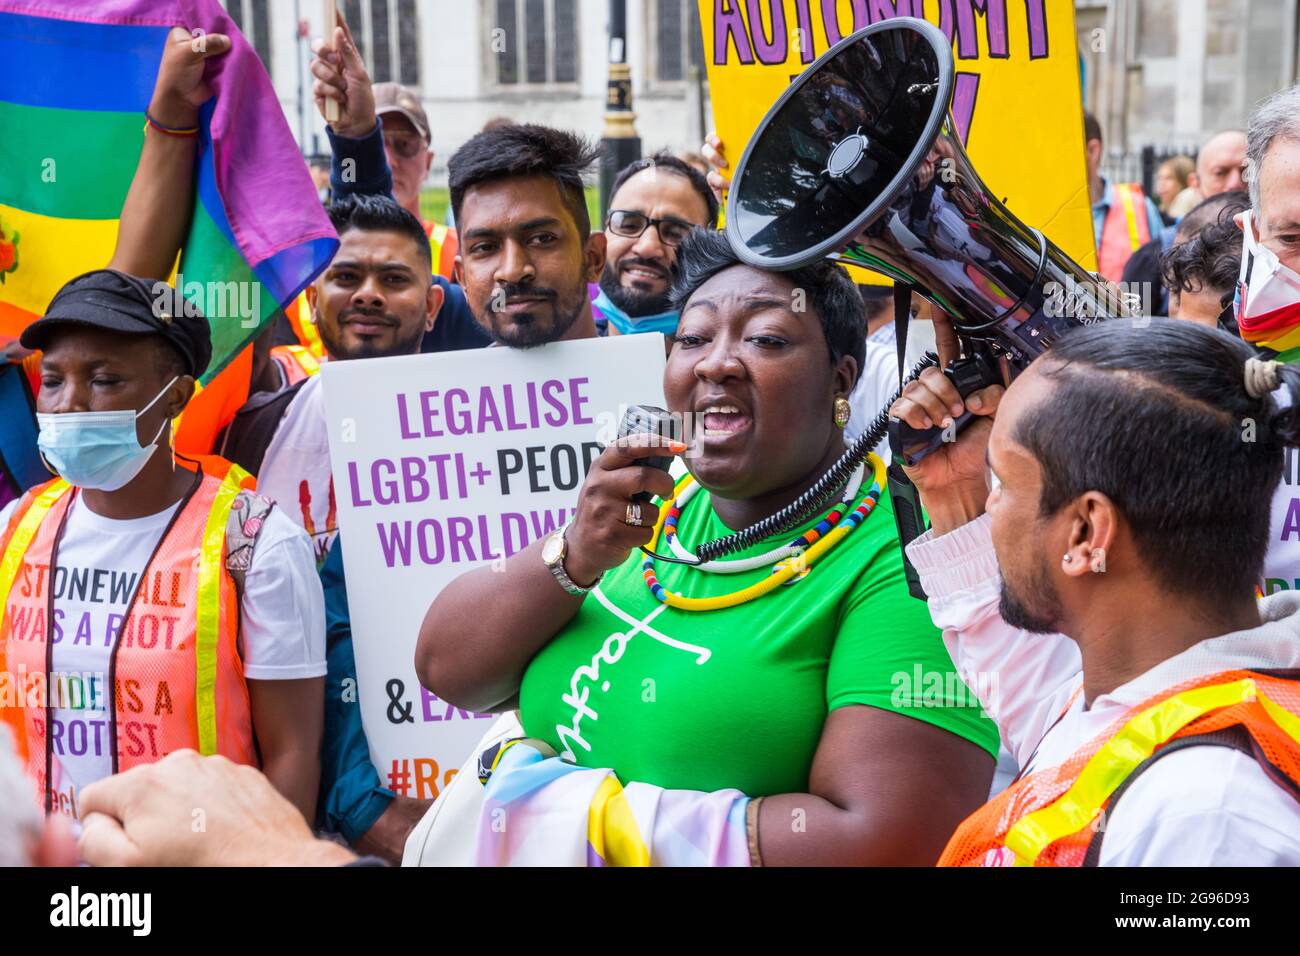 Phyll Opoku-Gyimah at the Reclaim pride protest, London, organised by Peter Tatchell Stock Photo